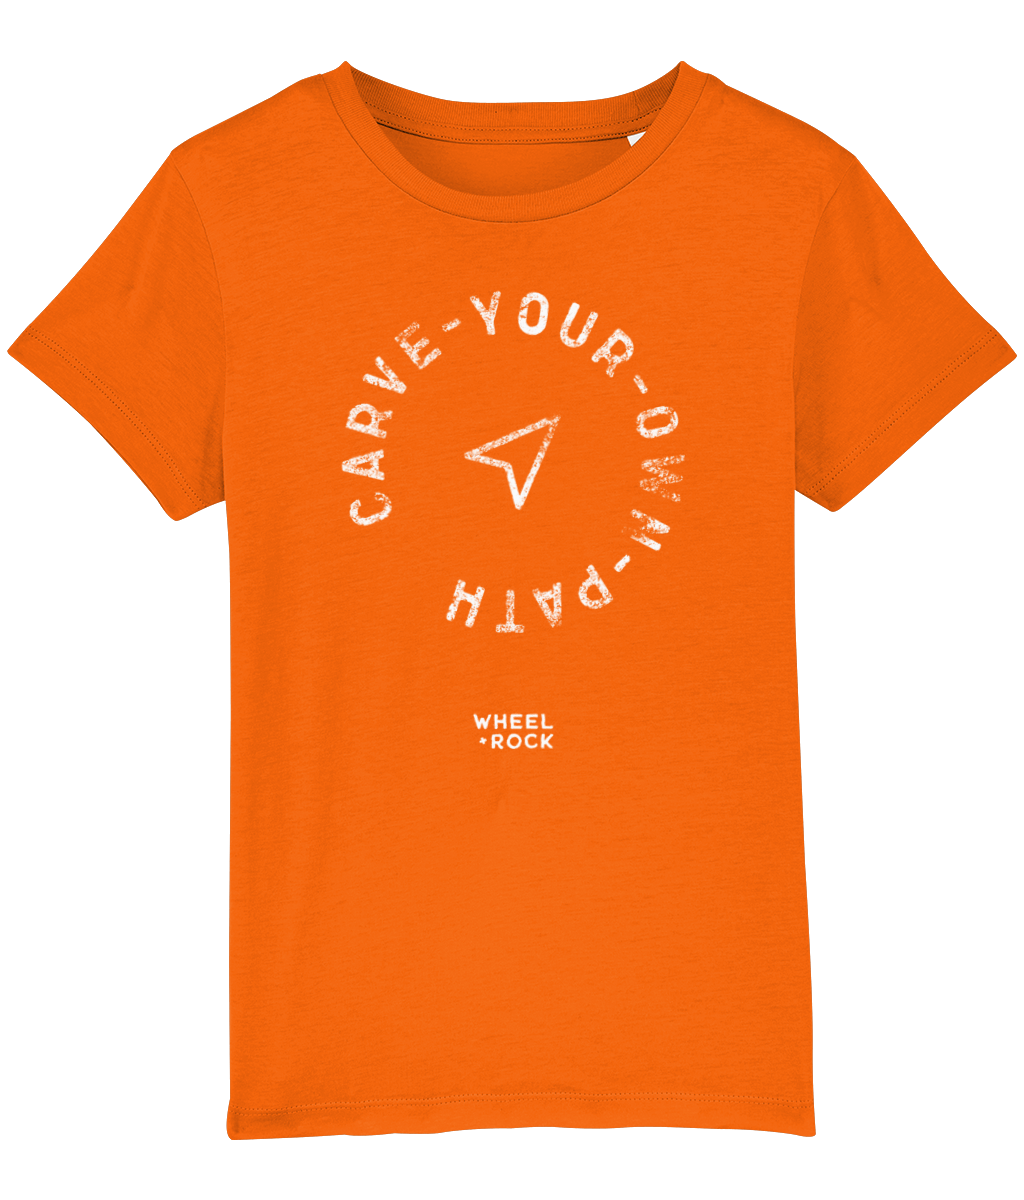 Carve Your Own Path - Kids Tee - BRIGHTS